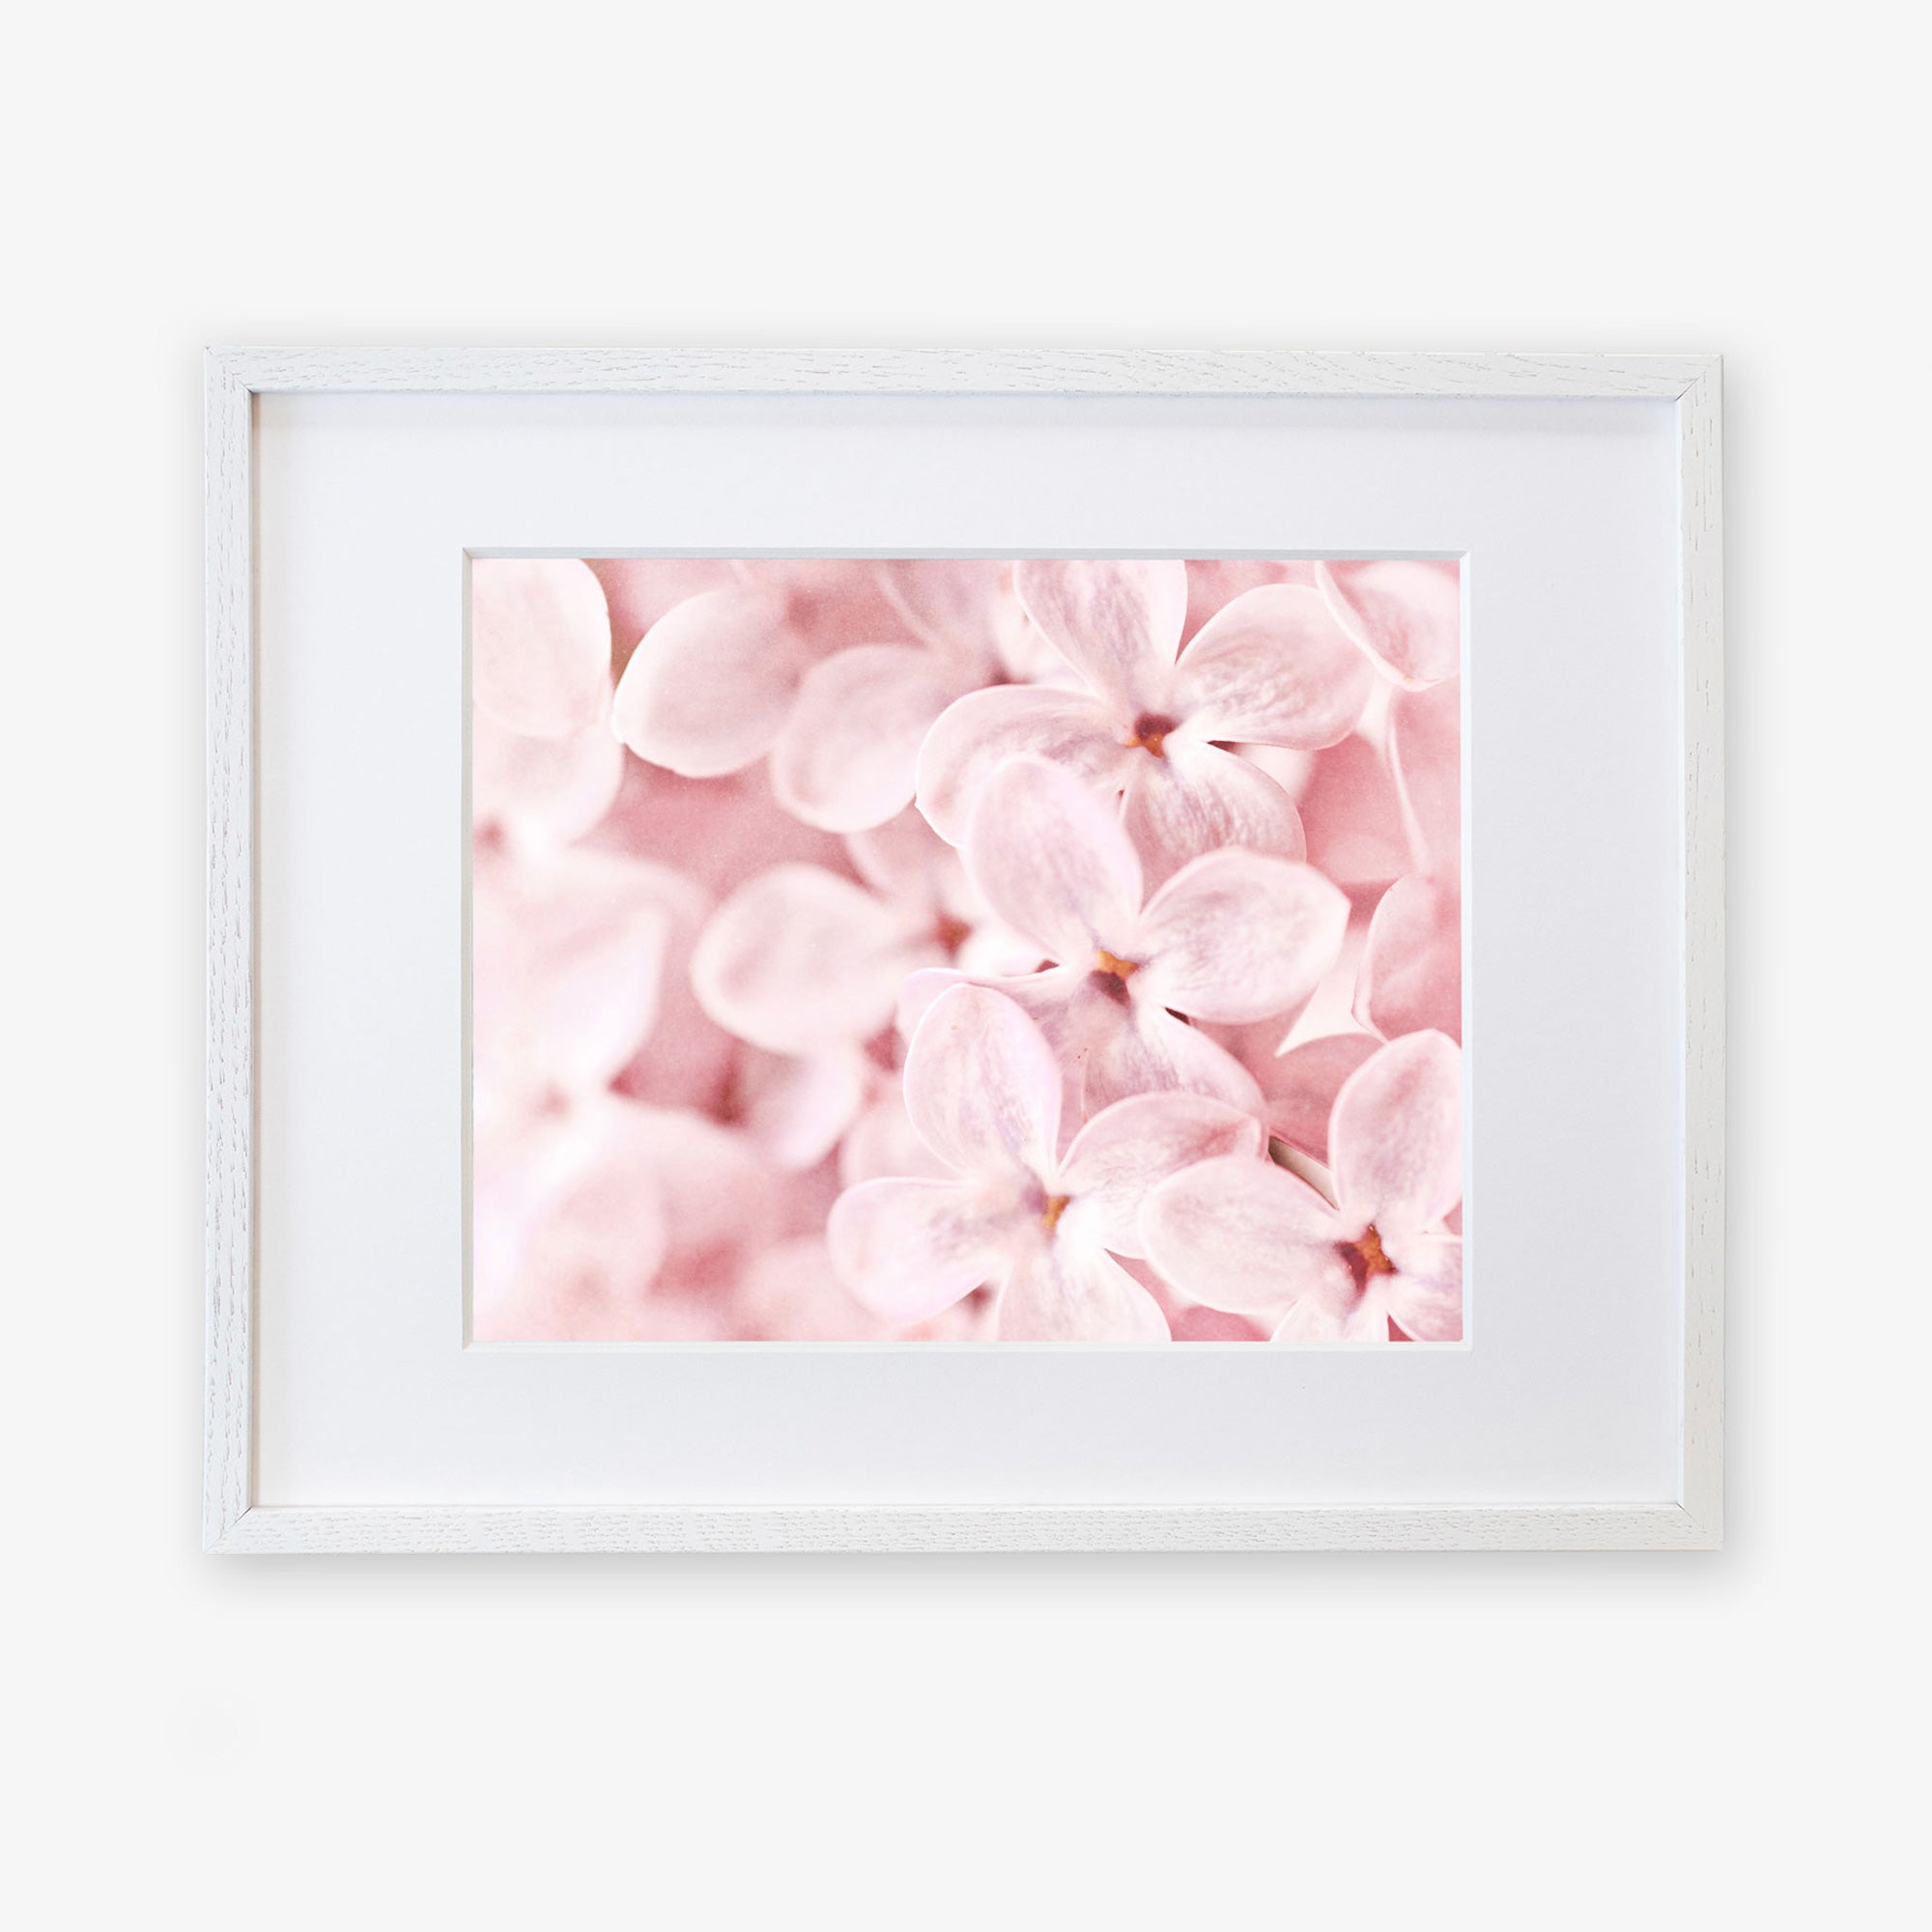 A framed photograph of soft pink lilac flowers, closely focused and filling the frame, printed on archival photographic paper and displayed in an elegant white frame against a pure white background from Offley Green&#39;s Pink Botanical Print, &#39;Bed of Lilacs&#39;.